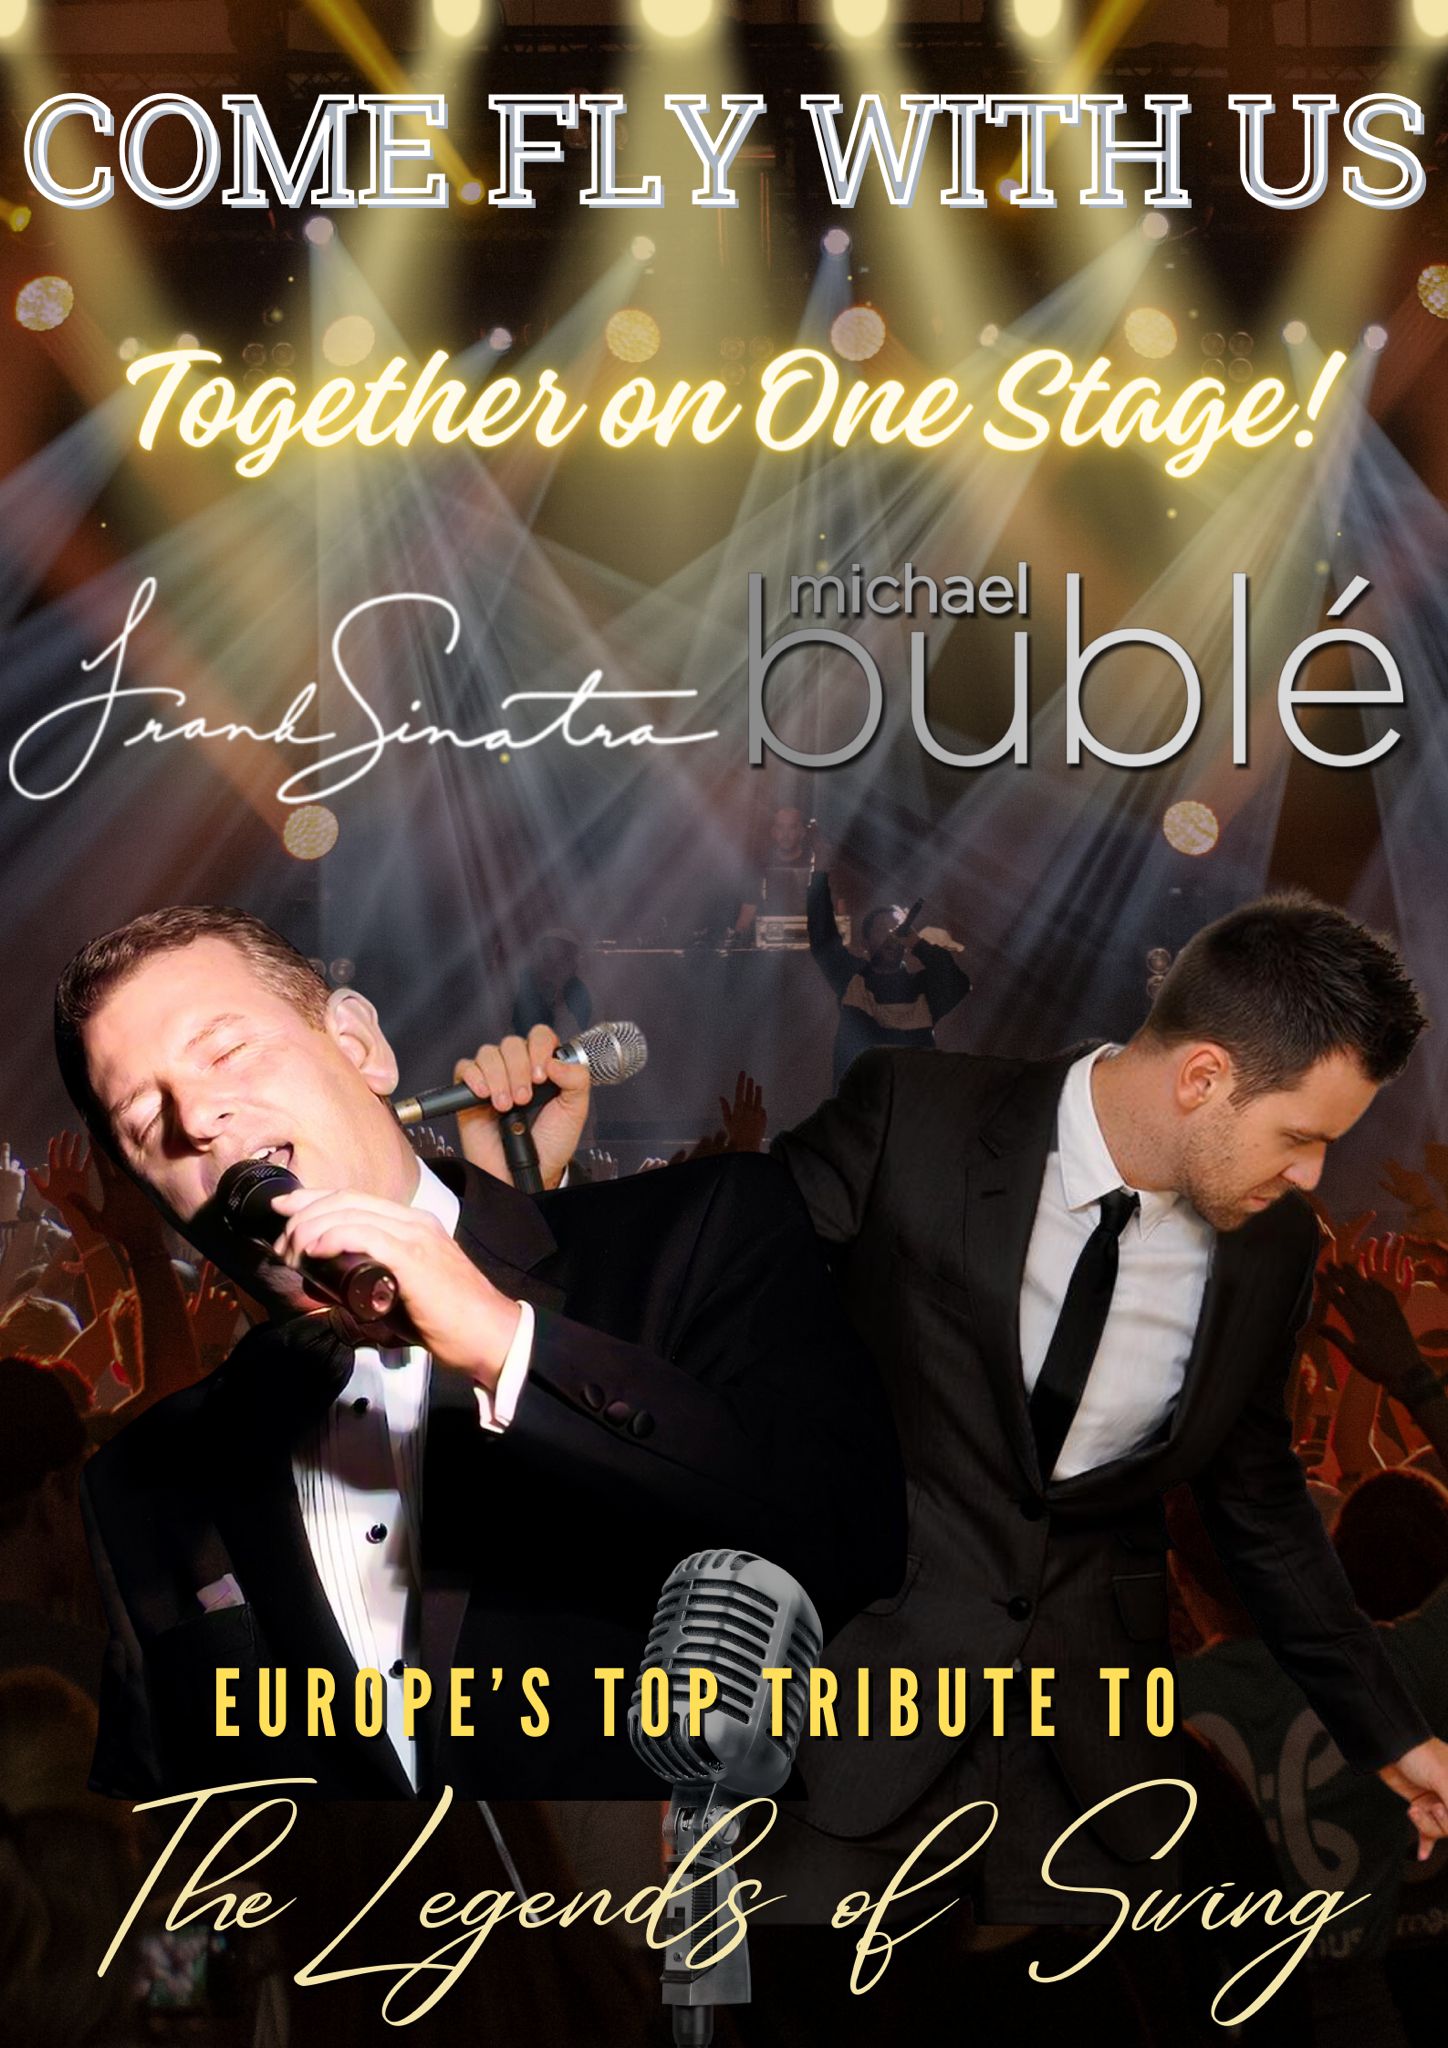 LEGENDS OF SWING - A TRIBUTE TO MICHAEL BUBLE AND FRANK SINATRA